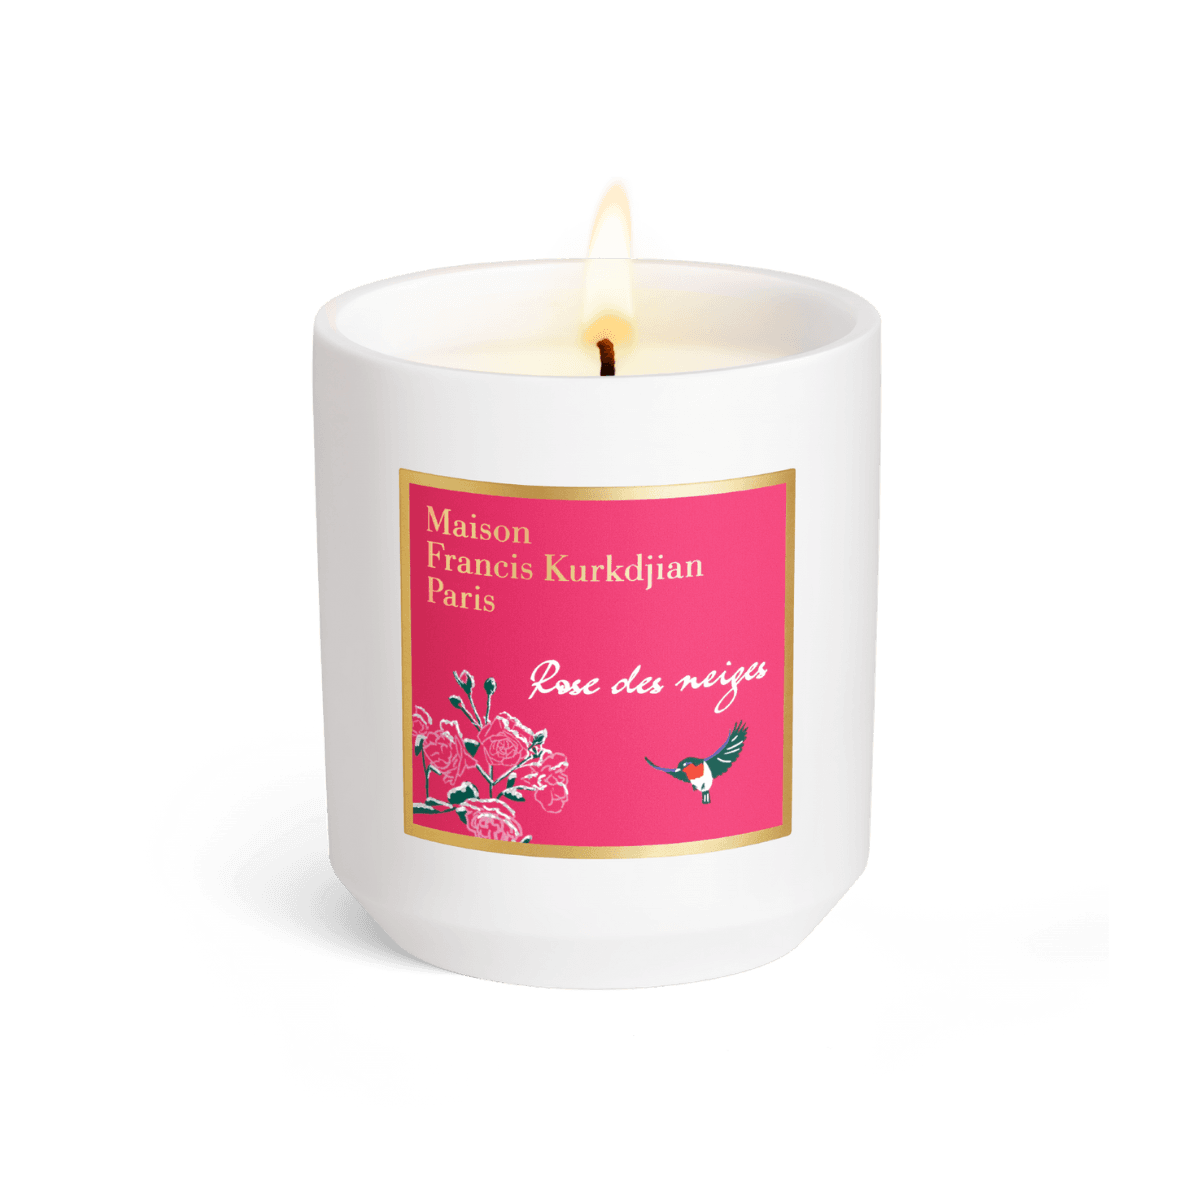 Image of Rose des Neiges scented candle by the perfume brand Maison Francis Kurkdjian